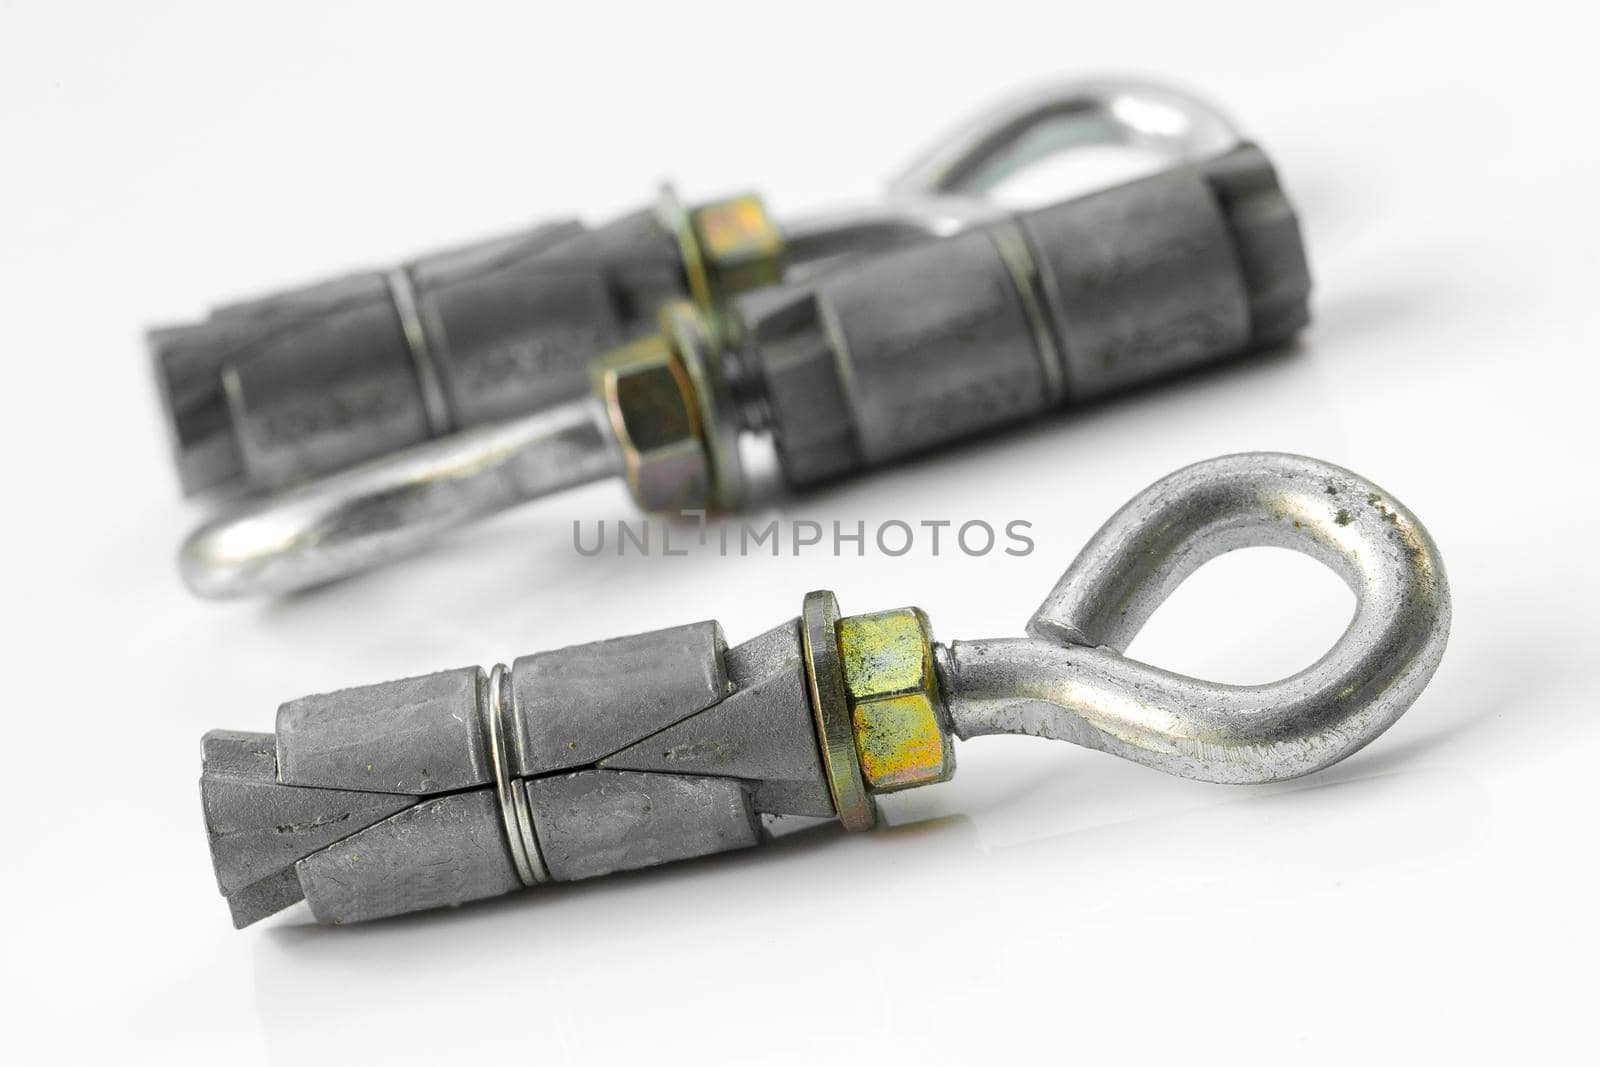 Anchor bolts, steel tools for construction on a white background by titipong